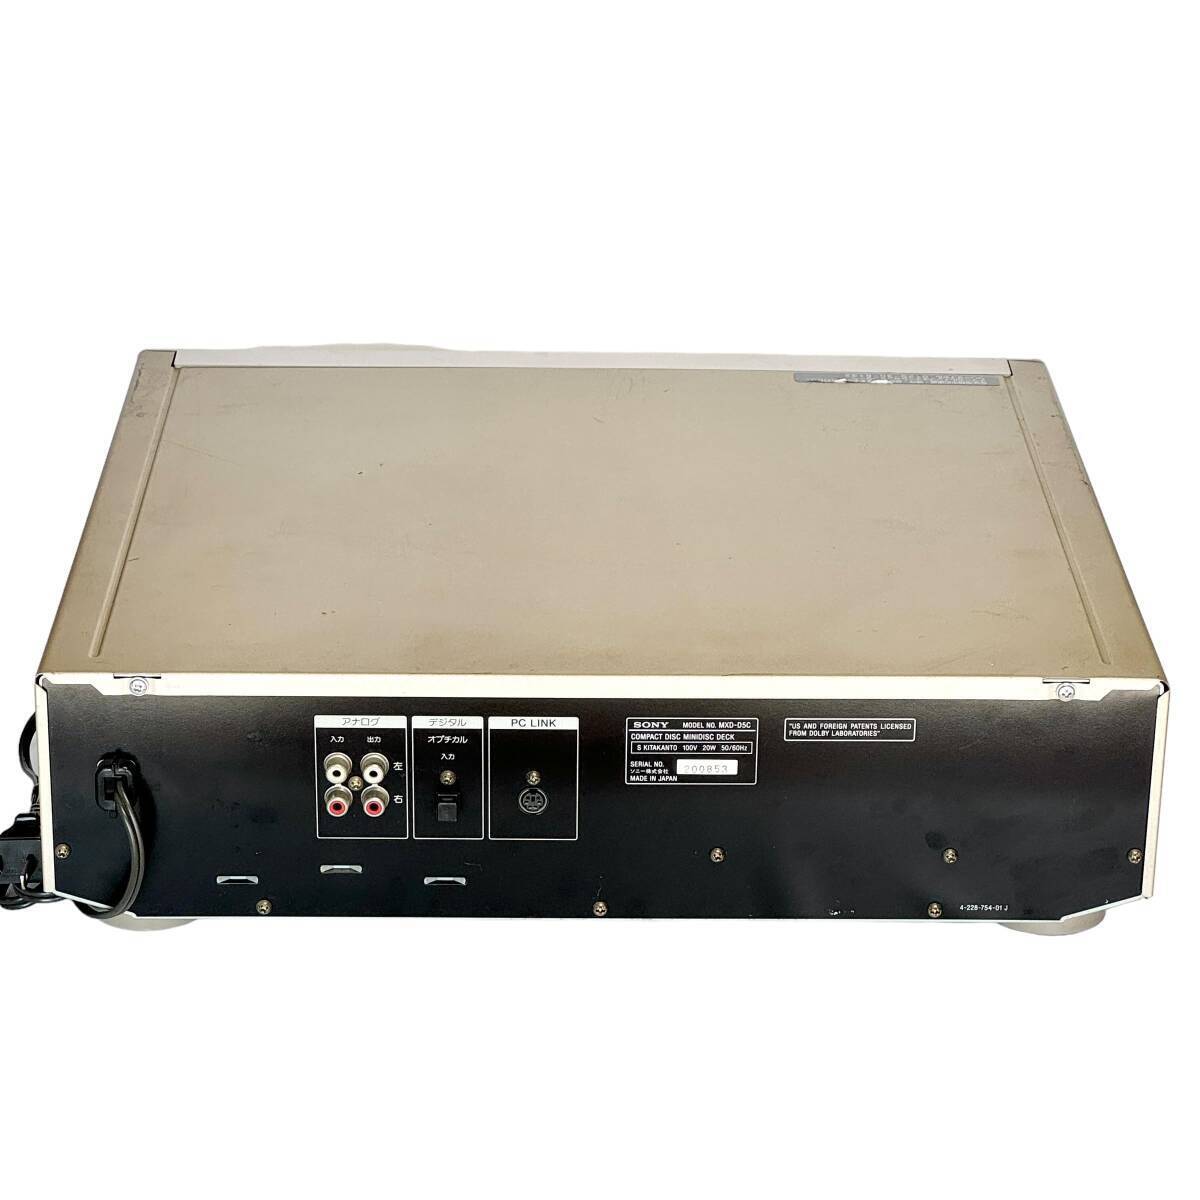 [240042] basis operation verification ending with defect SONY Sony MXD-D5C 5 sheets CD changer MD recorder one body deck 